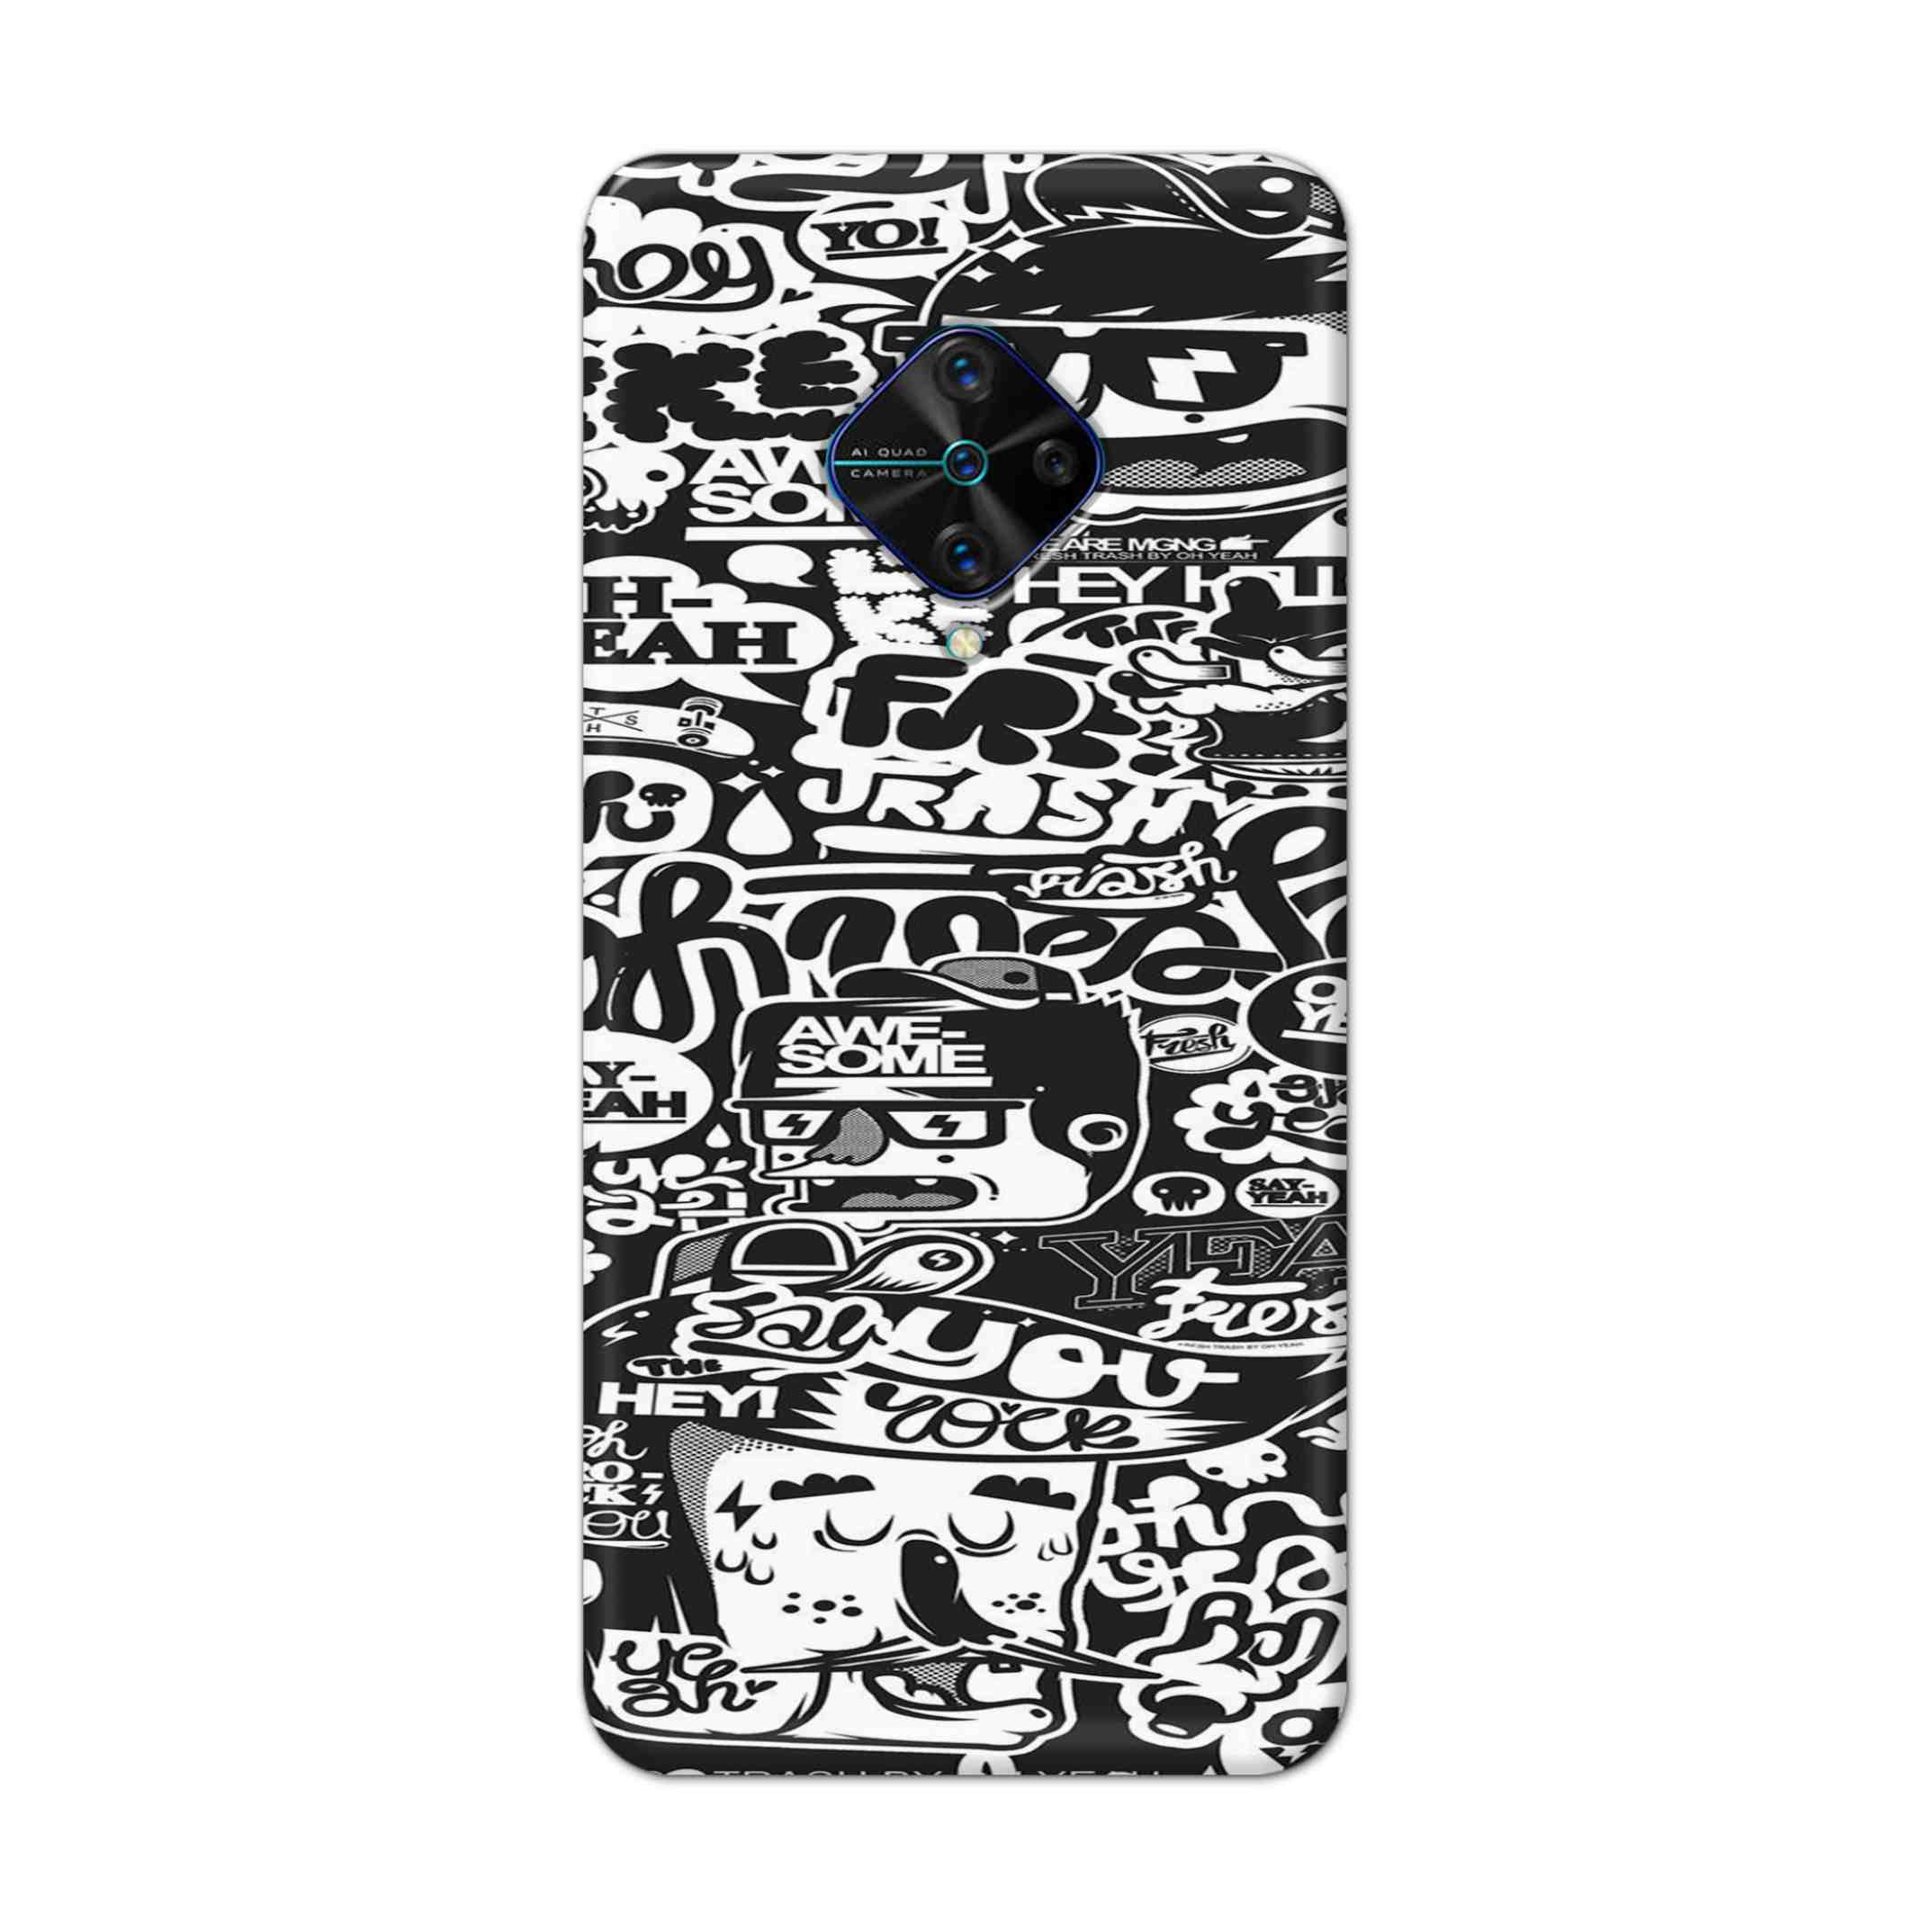 Buy Awesome Hard Back Mobile Phone Case Cover For Vivo S1 Pro Online